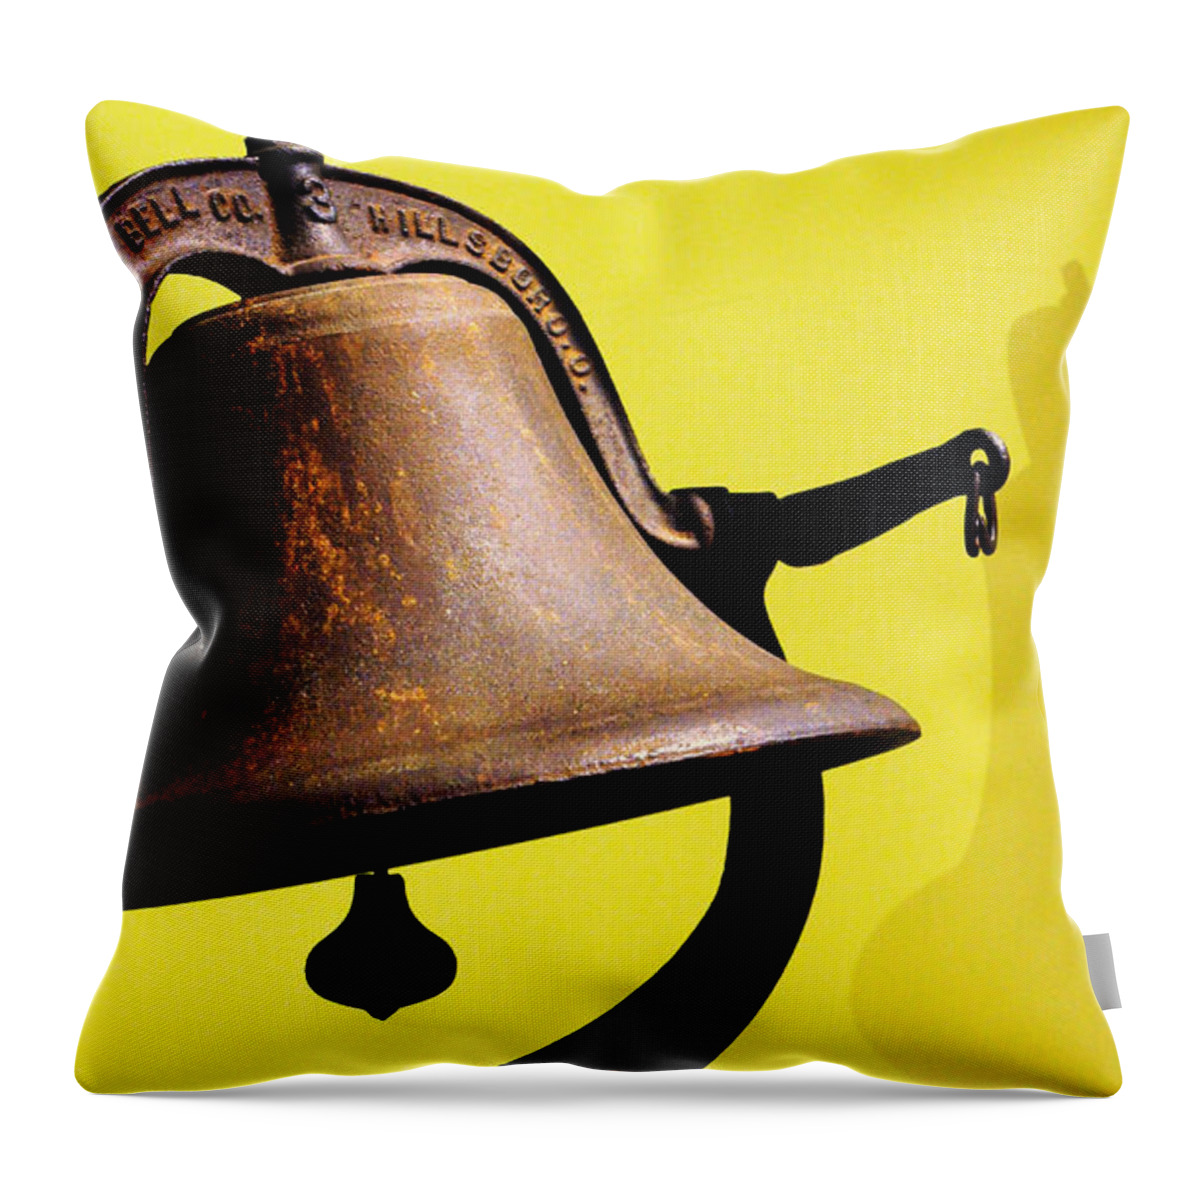 Historic Throw Pillow featuring the photograph Ship's Bell by Rebecca Sherman